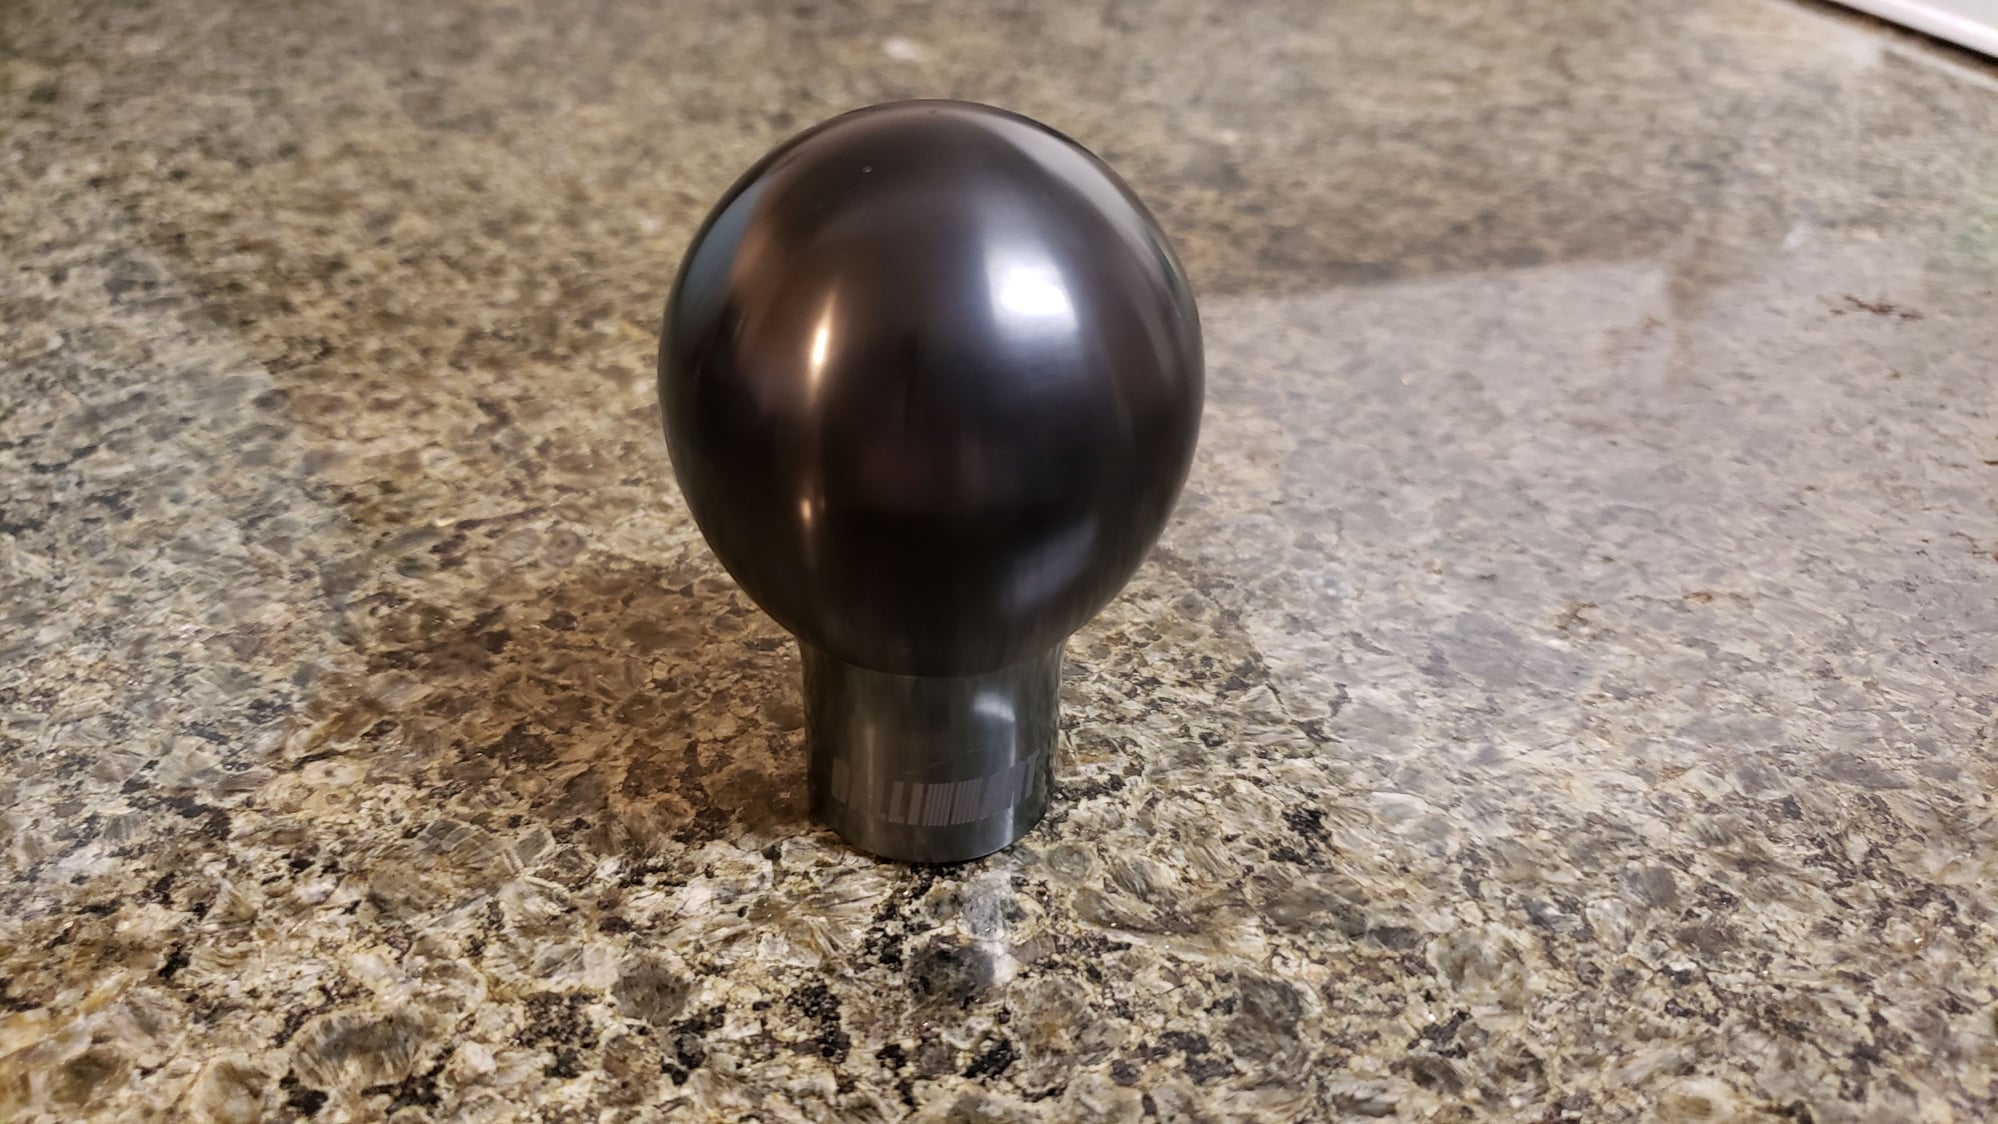 Interior/Upholstery - Rare Discontinued Ralliart Shift Knob - Used - Los Angeles, CA 90011, United States